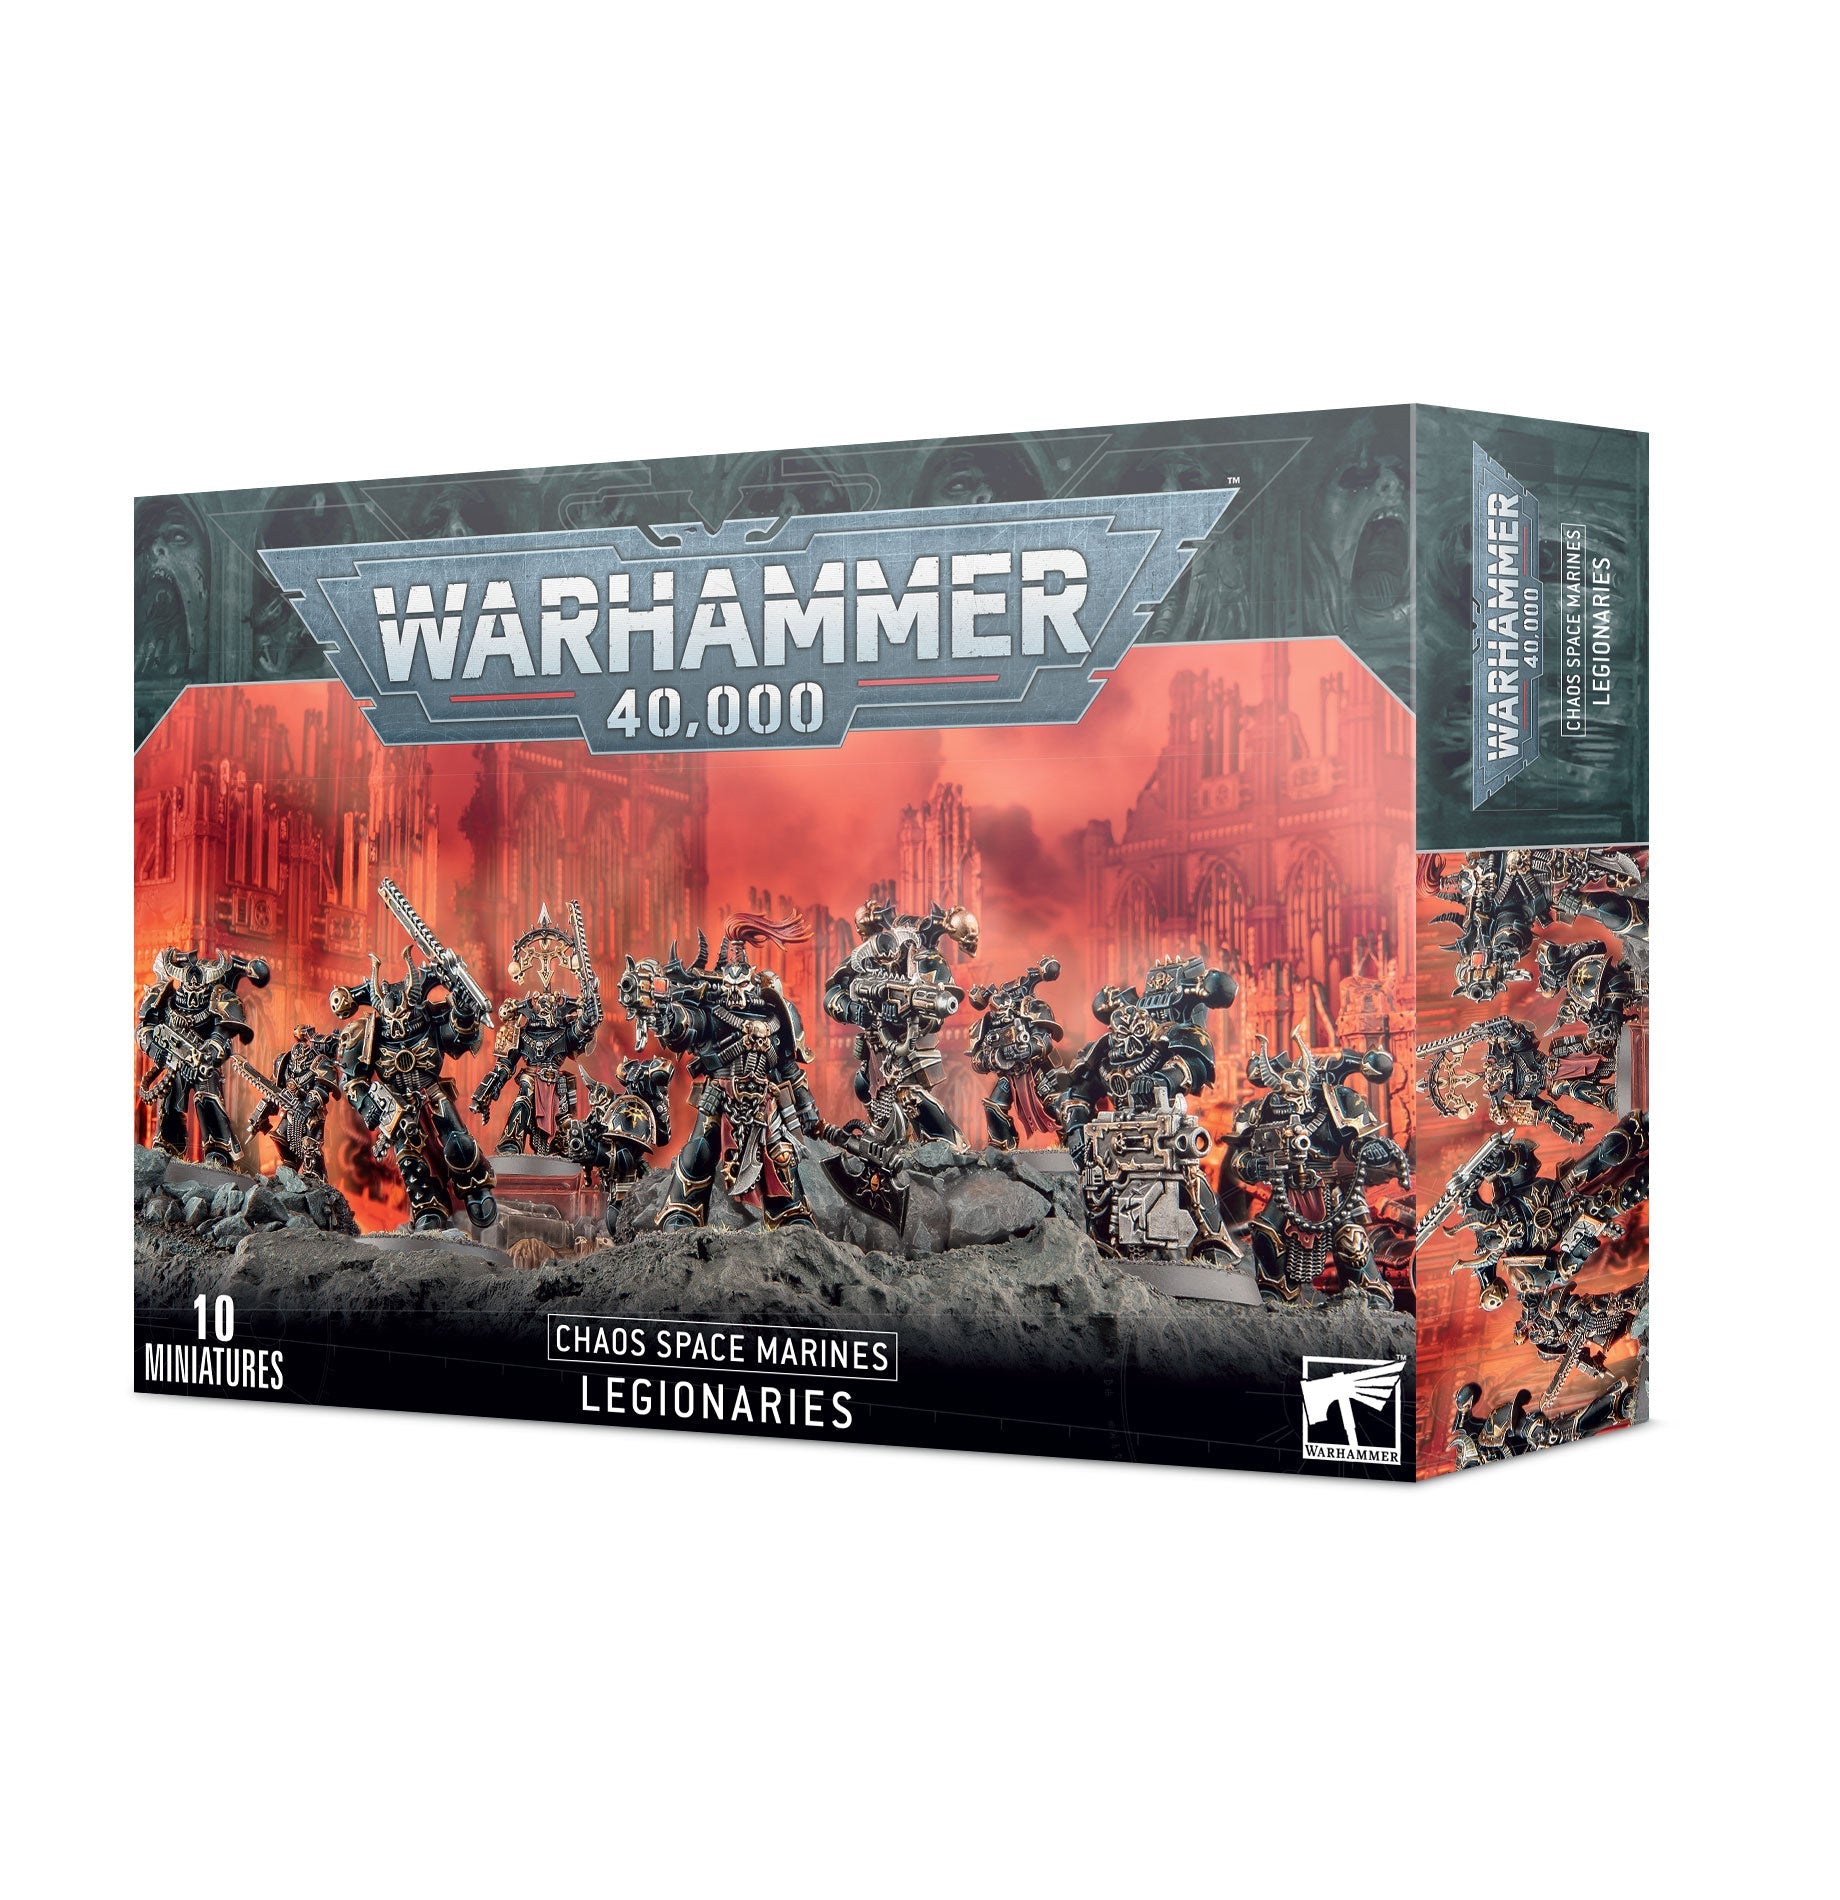 WH40K CHAOS SPACE MARINES | Impulse Games and Hobbies